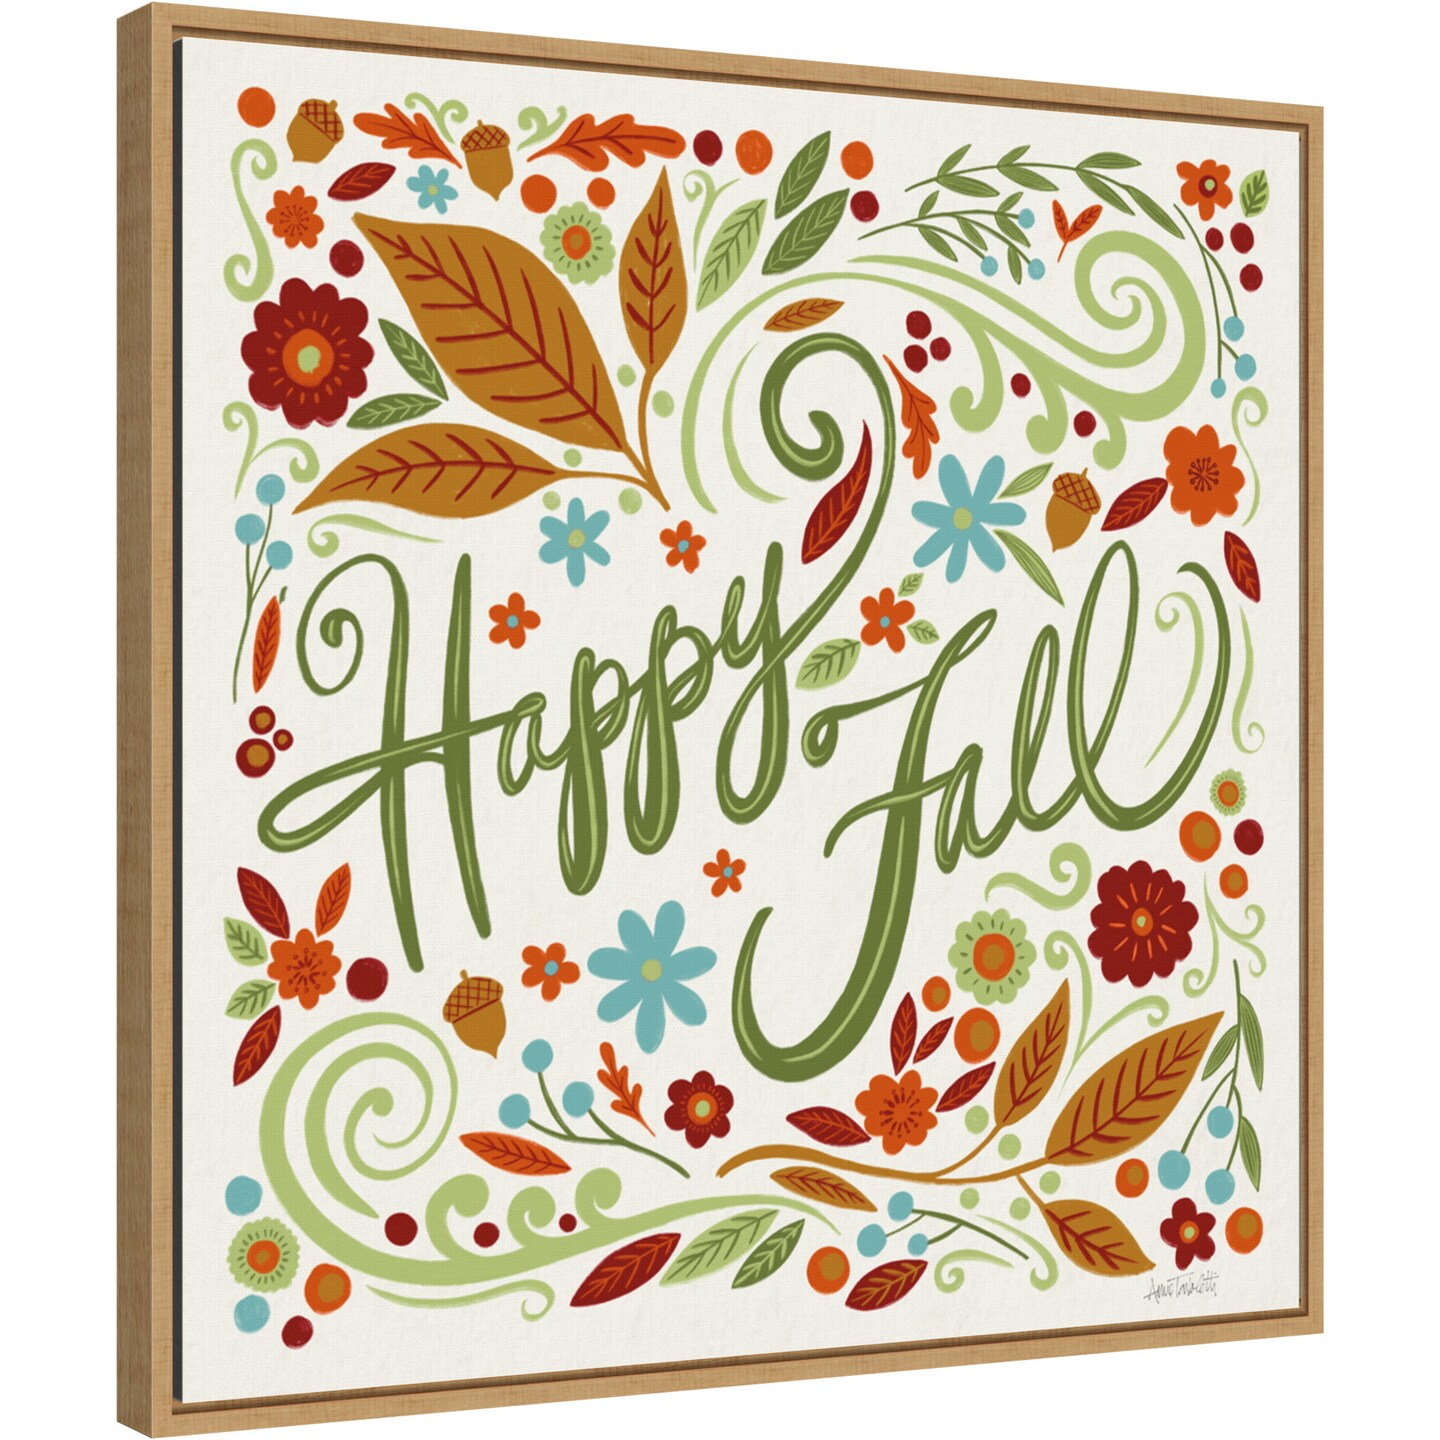 Happy Fall I by Anne Tavoletti 22-in. W x 22-in. H. Canvas Wall Art Print Framed in Natural